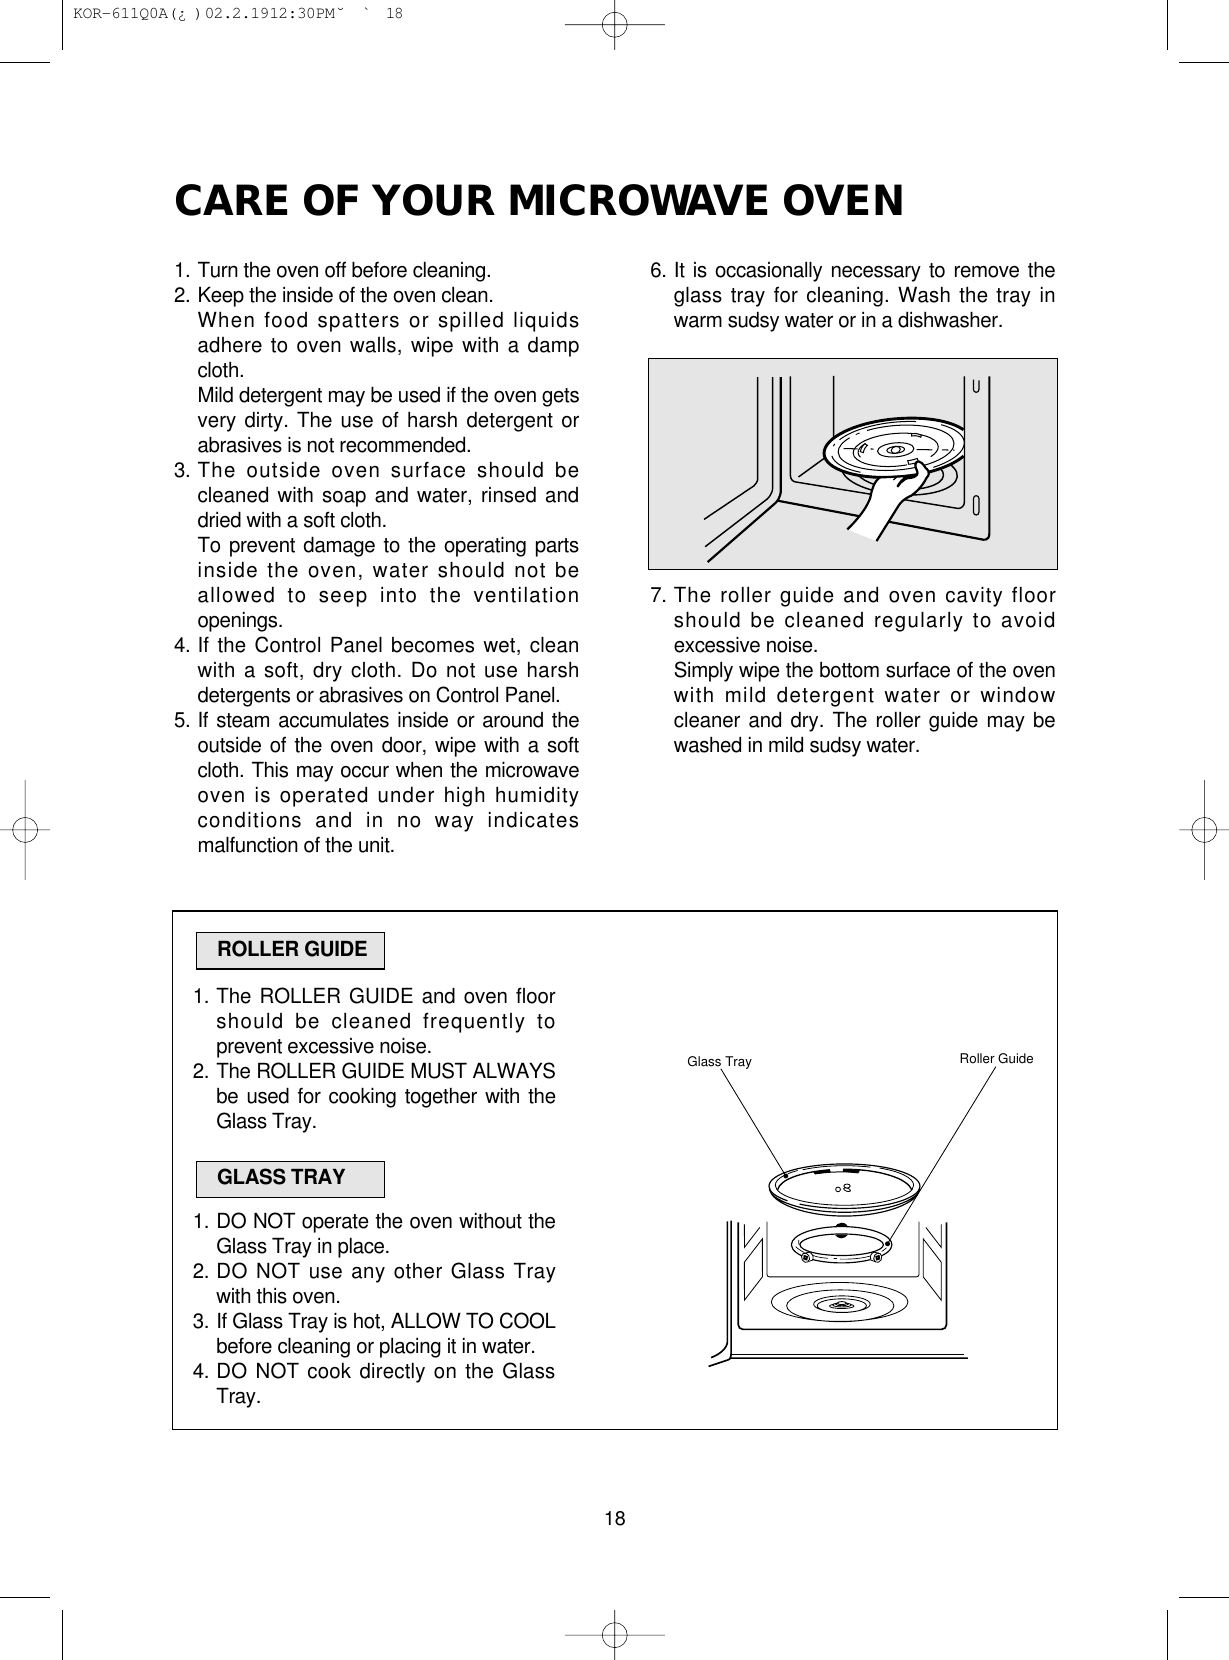 CARE OF YOUR MICROWAVE OVEN181. Turn the oven off before cleaning.2. Keep the inside of the oven clean.When food spatters or spilled liquidsadhere to oven walls, wipe with a dampcloth.Mild detergent may be used if the oven getsvery dirty. The use of harsh detergent orabrasives is not recommended.3. The outside oven surface should becleaned with soap and water, rinsed anddried with a soft cloth.To prevent damage to the operating partsinside the oven, water should not beallowed to seep into the ventilationopenings.4. If the Control Panel becomes wet, cleanwith a soft, dry cloth. Do not use harshdetergents or abrasives on Control Panel.5. If steam accumulates inside or around theoutside of the oven door, wipe with a softcloth. This may occur when the microwaveoven is operated under high humidityconditions and in no way indicatesmalfunction of the unit.6. It is occasionally necessary to remove theglass tray for cleaning. Wash the tray inwarm sudsy water or in a dishwasher.7. The roller guide and oven cavity floorshould be cleaned regularly to avoidexcessive noise. Simply wipe the bottom surface of the ovenwith mild detergent water or windowcleaner and dry. The roller guide may bewashed in mild sudsy water.1. The ROLLER GUIDE and oven floorshould be cleaned frequently toprevent excessive noise.2. The ROLLER GUIDE MUST ALWAYSbe used for cooking together with theGlass Tray.1. DO NOT operate the oven without theGlass Tray in place.2. DO NOT use any other Glass Traywith this oven.3. If Glass Tray is hot, ALLOW TO COOLbefore cleaning or placing it in water.4. DO NOT cook directly on the GlassTray.ROLLER GUIDEGLASS TRAYGlass Tray Roller Guide KOR-611Q0A(¿ )  02.2.19 12:30 PM  ˘`18